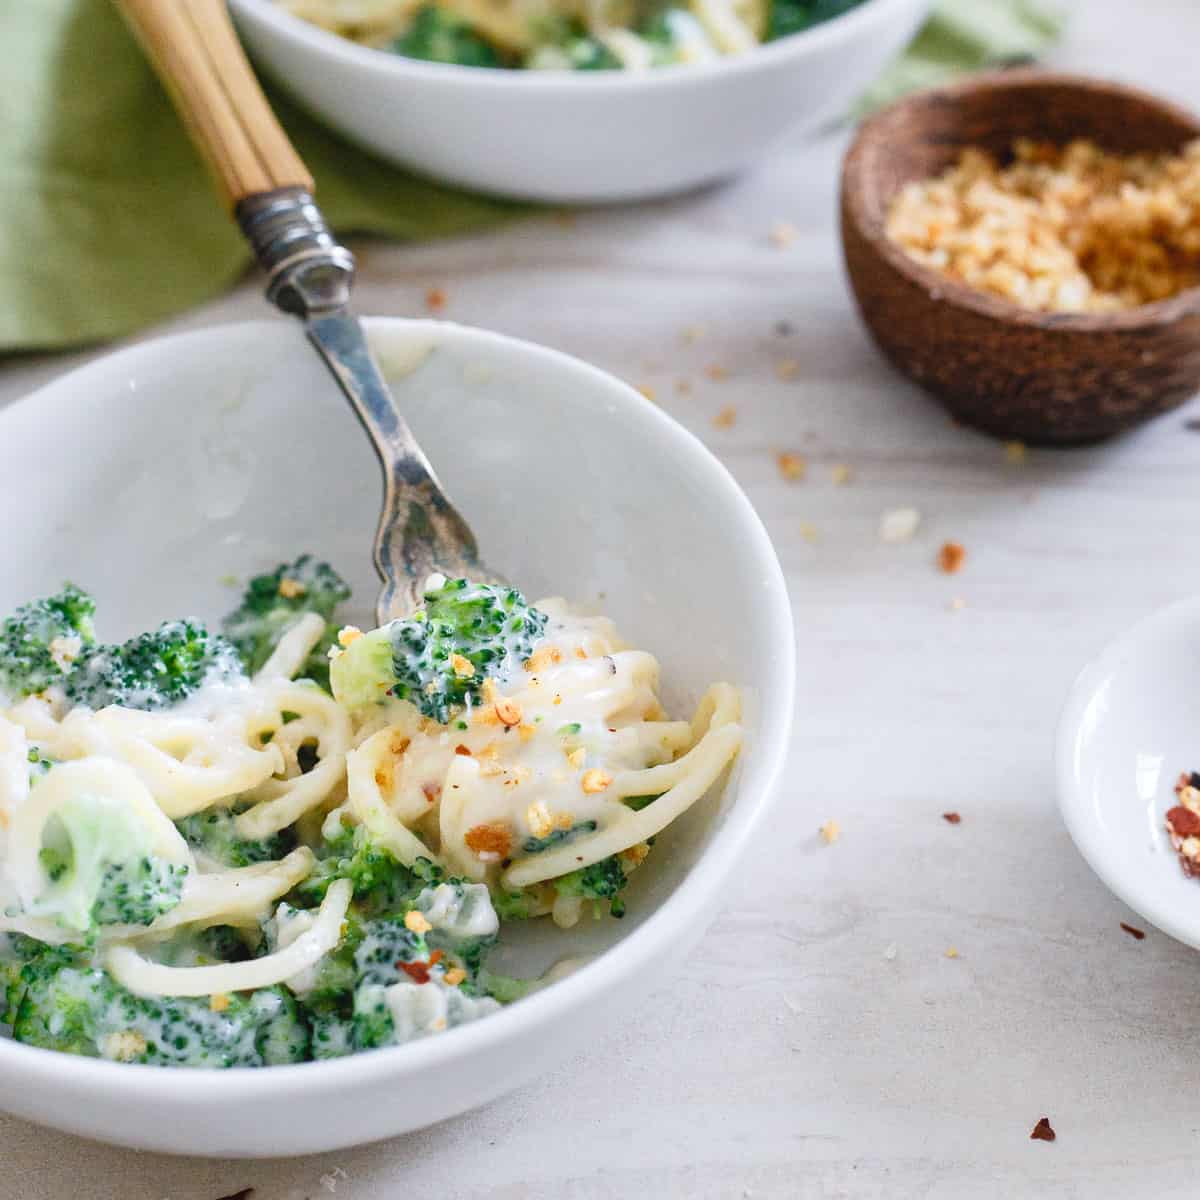 Creamy, cheesy and super decadent, you'll never know this lightened up spaghetti alfredo is a healthier spin on the classic pasta dish.